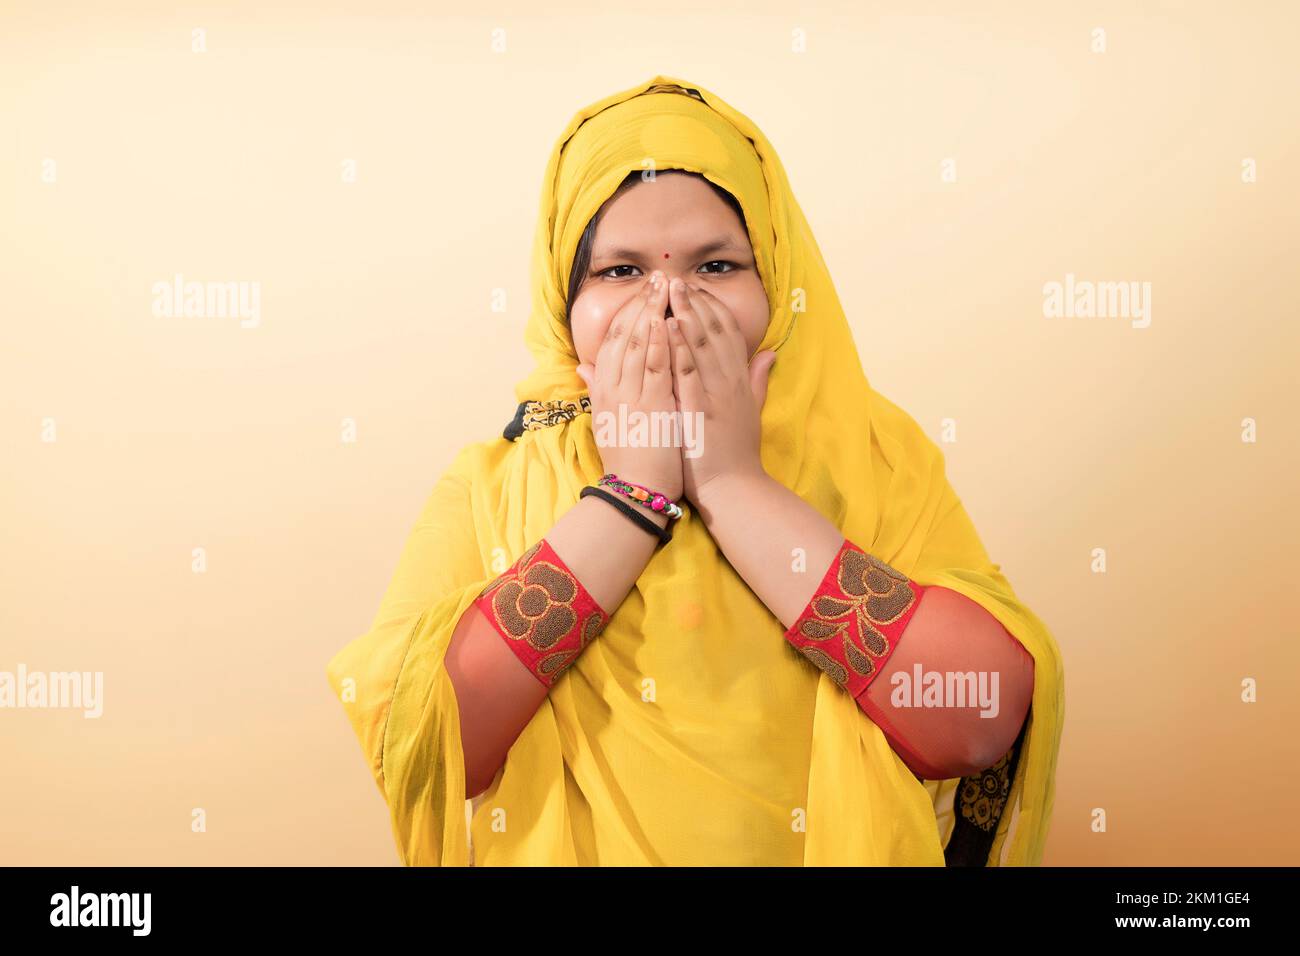 A religious Asian Muslim child girl in the Muslim hijab dress and covering her mouth Stock Photo